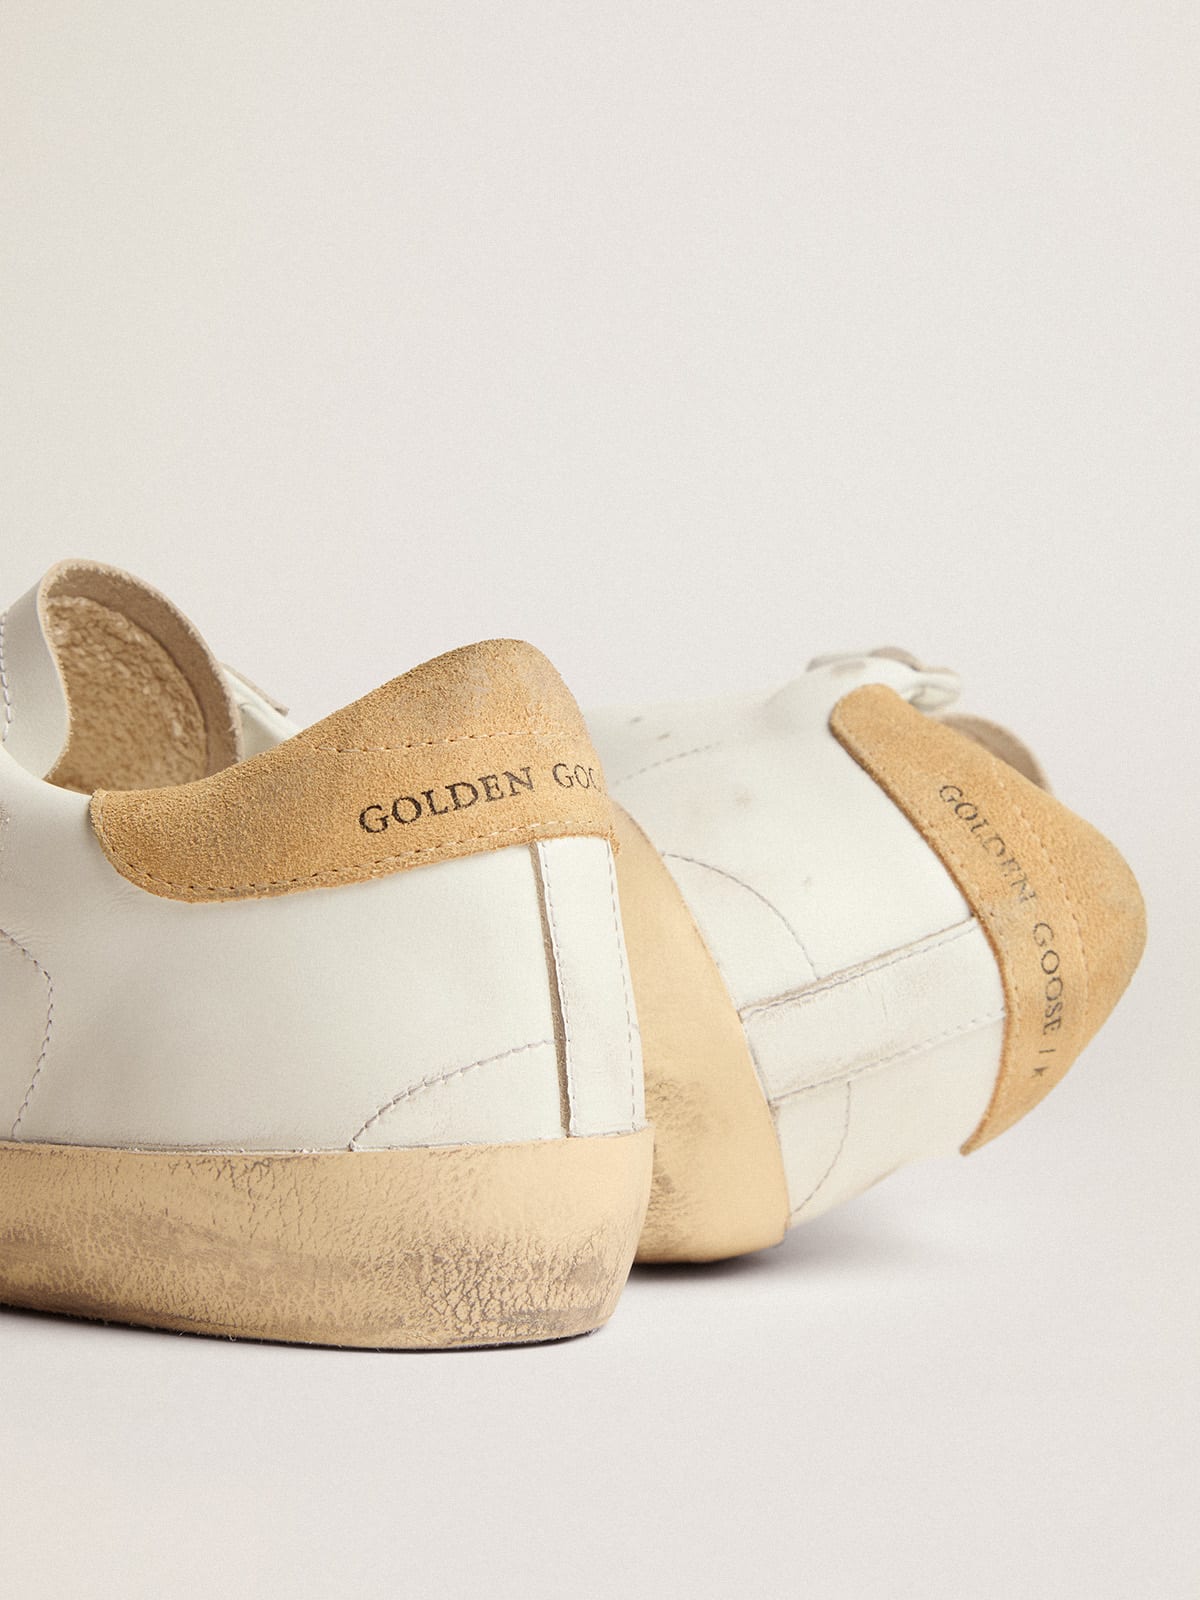 Golden Goose - Old School sneakers with pink glitter star and sand-colored suede heel tab in 